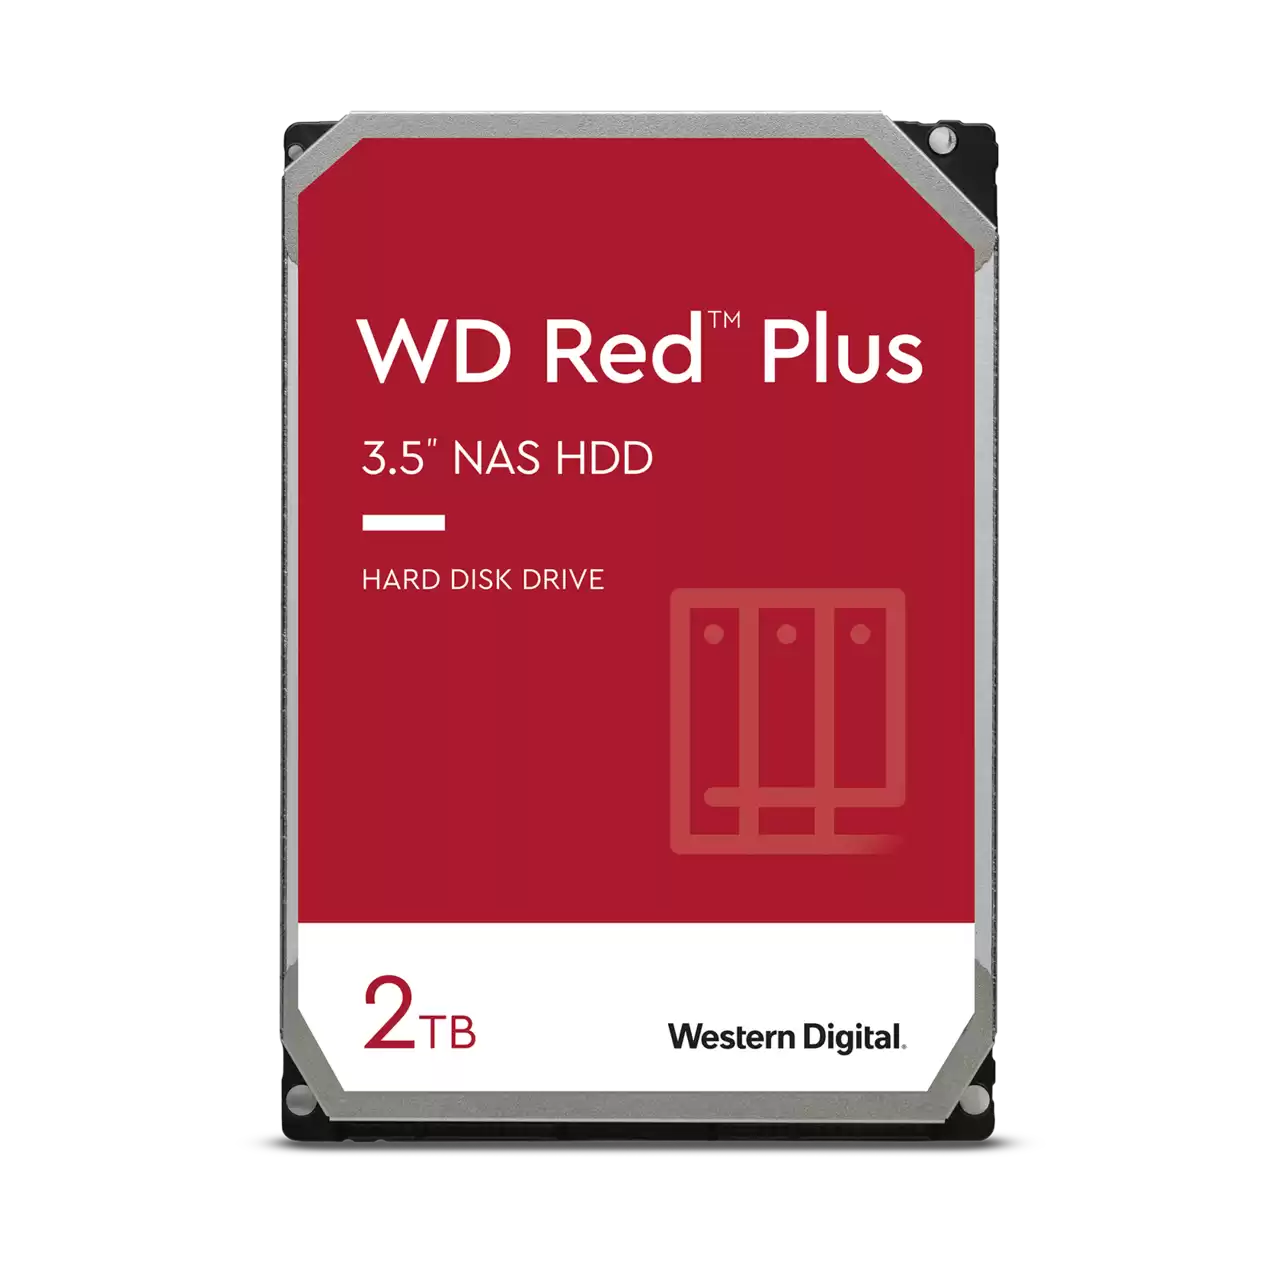 WD Red WD20EFPX  Plus CMR 2TB SATA 3.5 128 MB Cache HDD